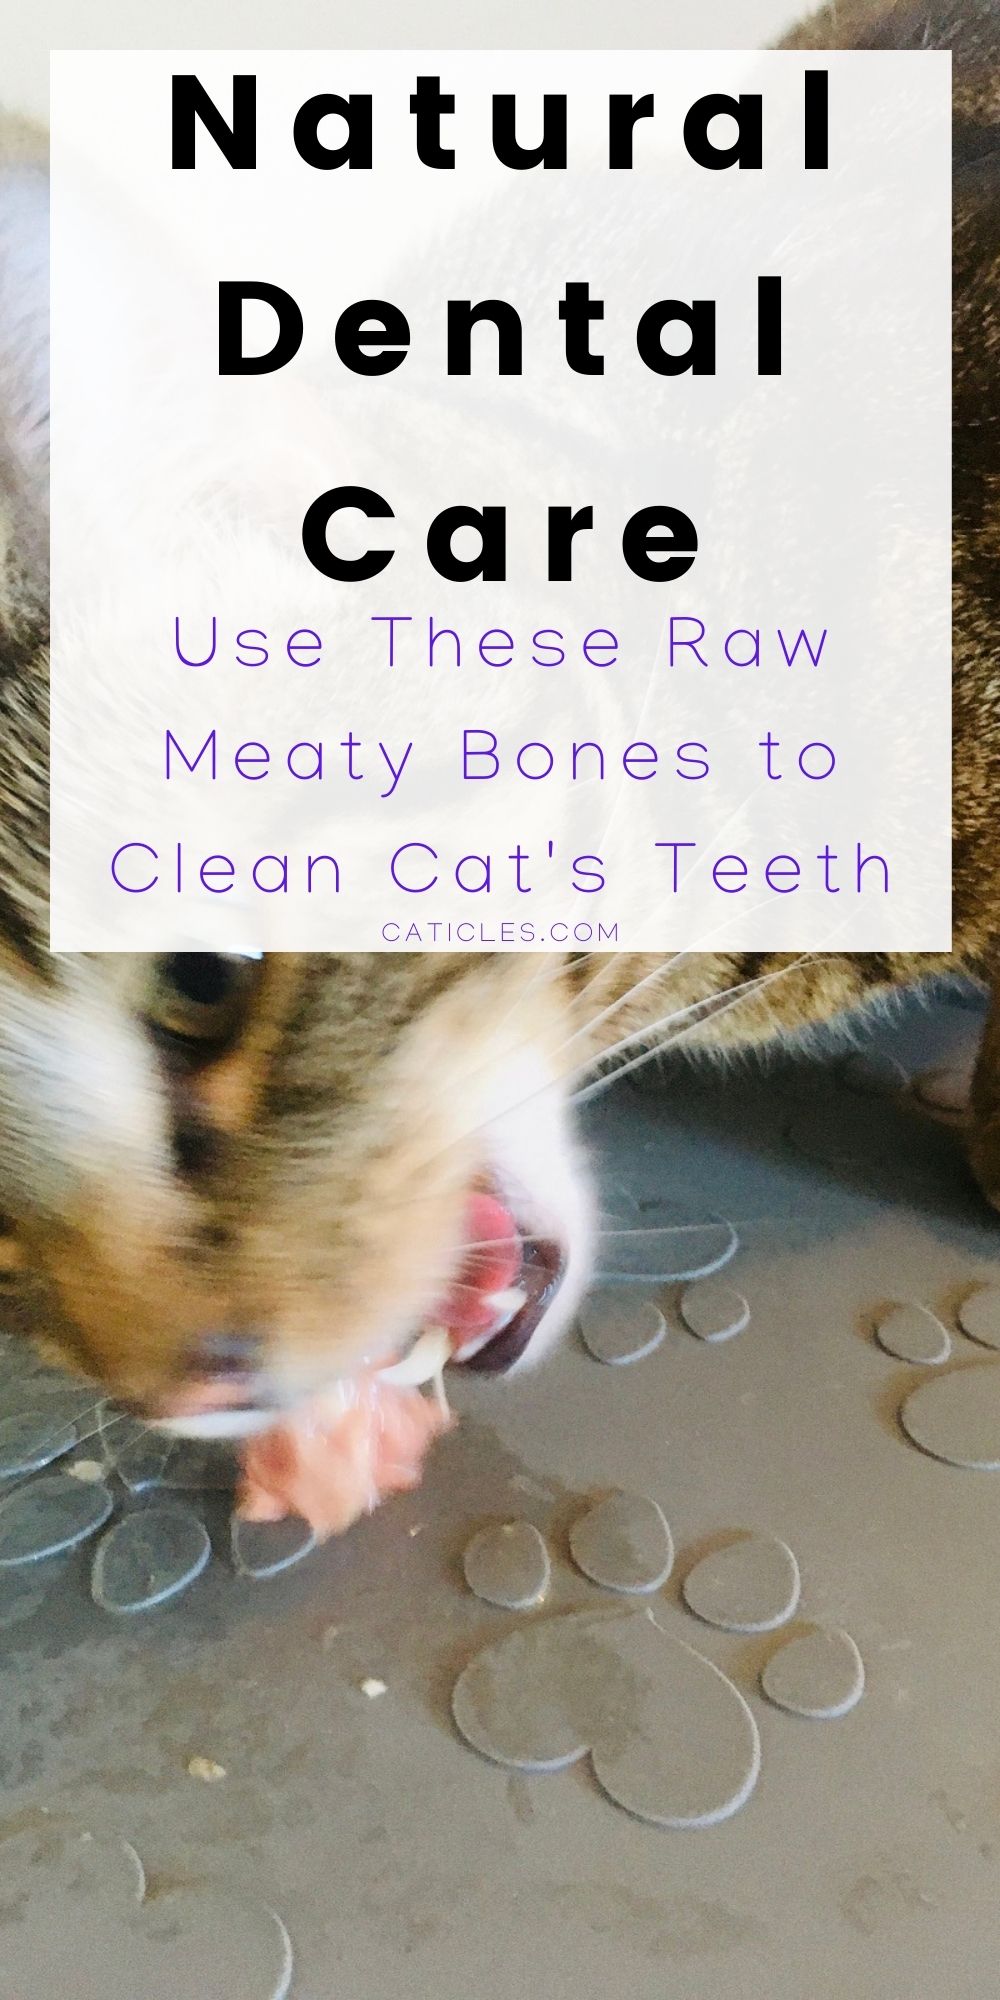 Raw Bones For Cats Are There Bones For Cats To Chew On